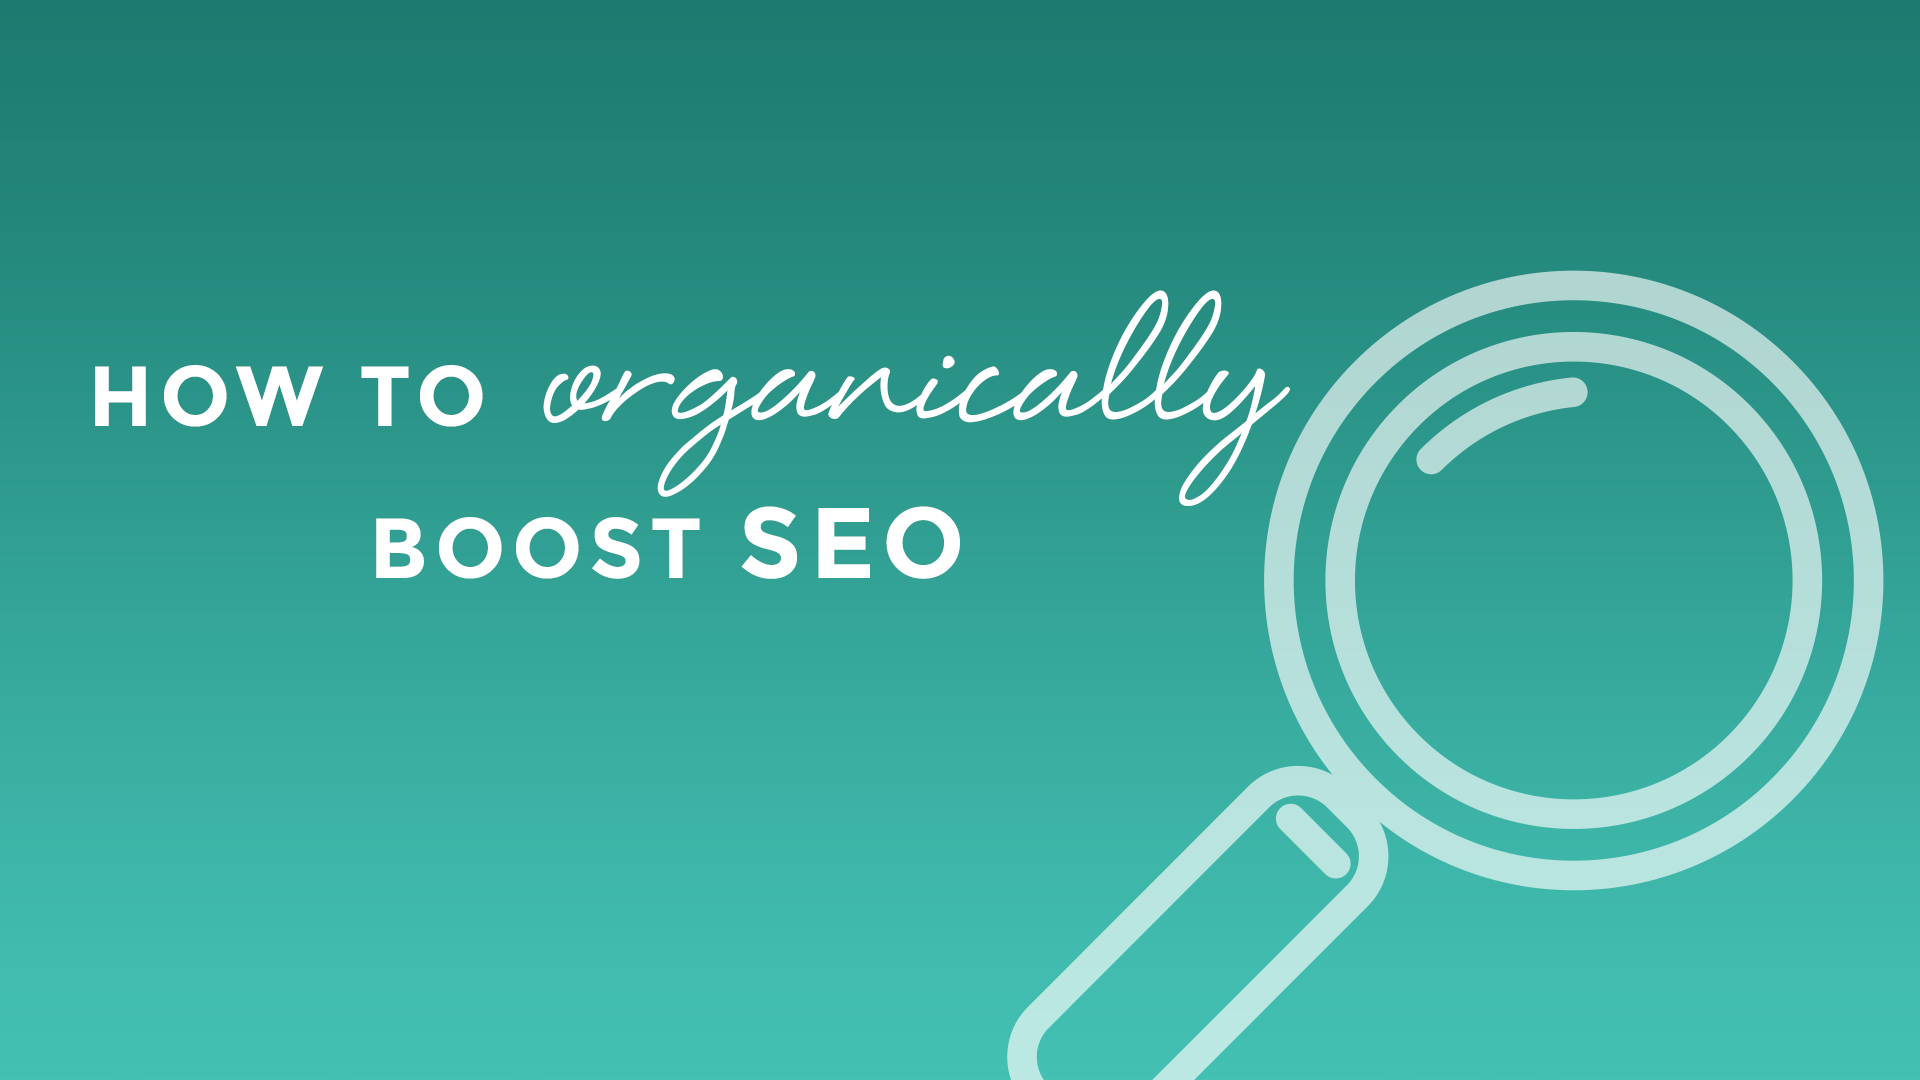 How to organically boost SEO